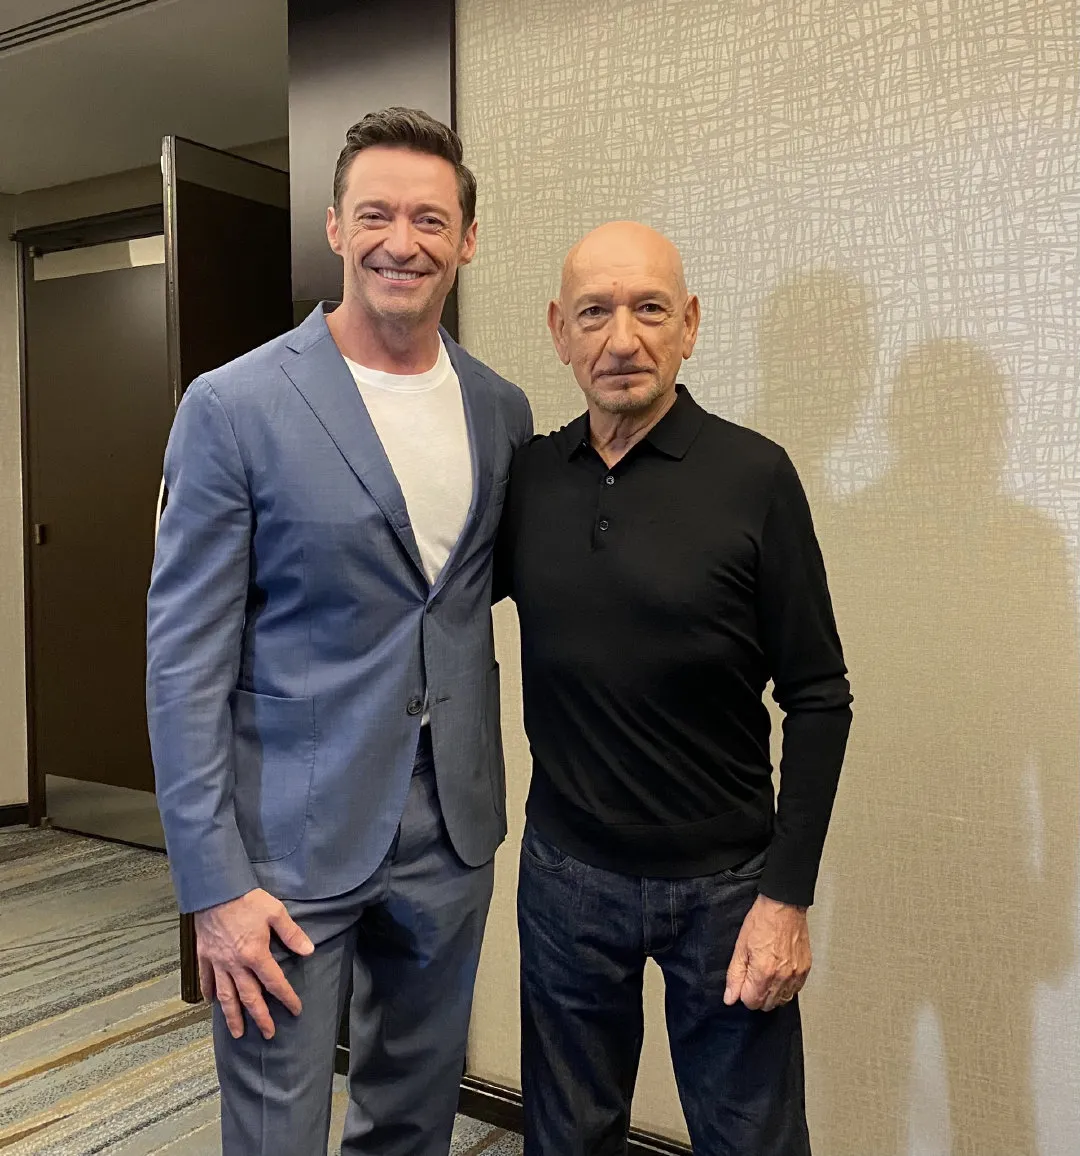 Hugh Jackman shares a photo of a chance encounter with Ben Kingsley | FMV6